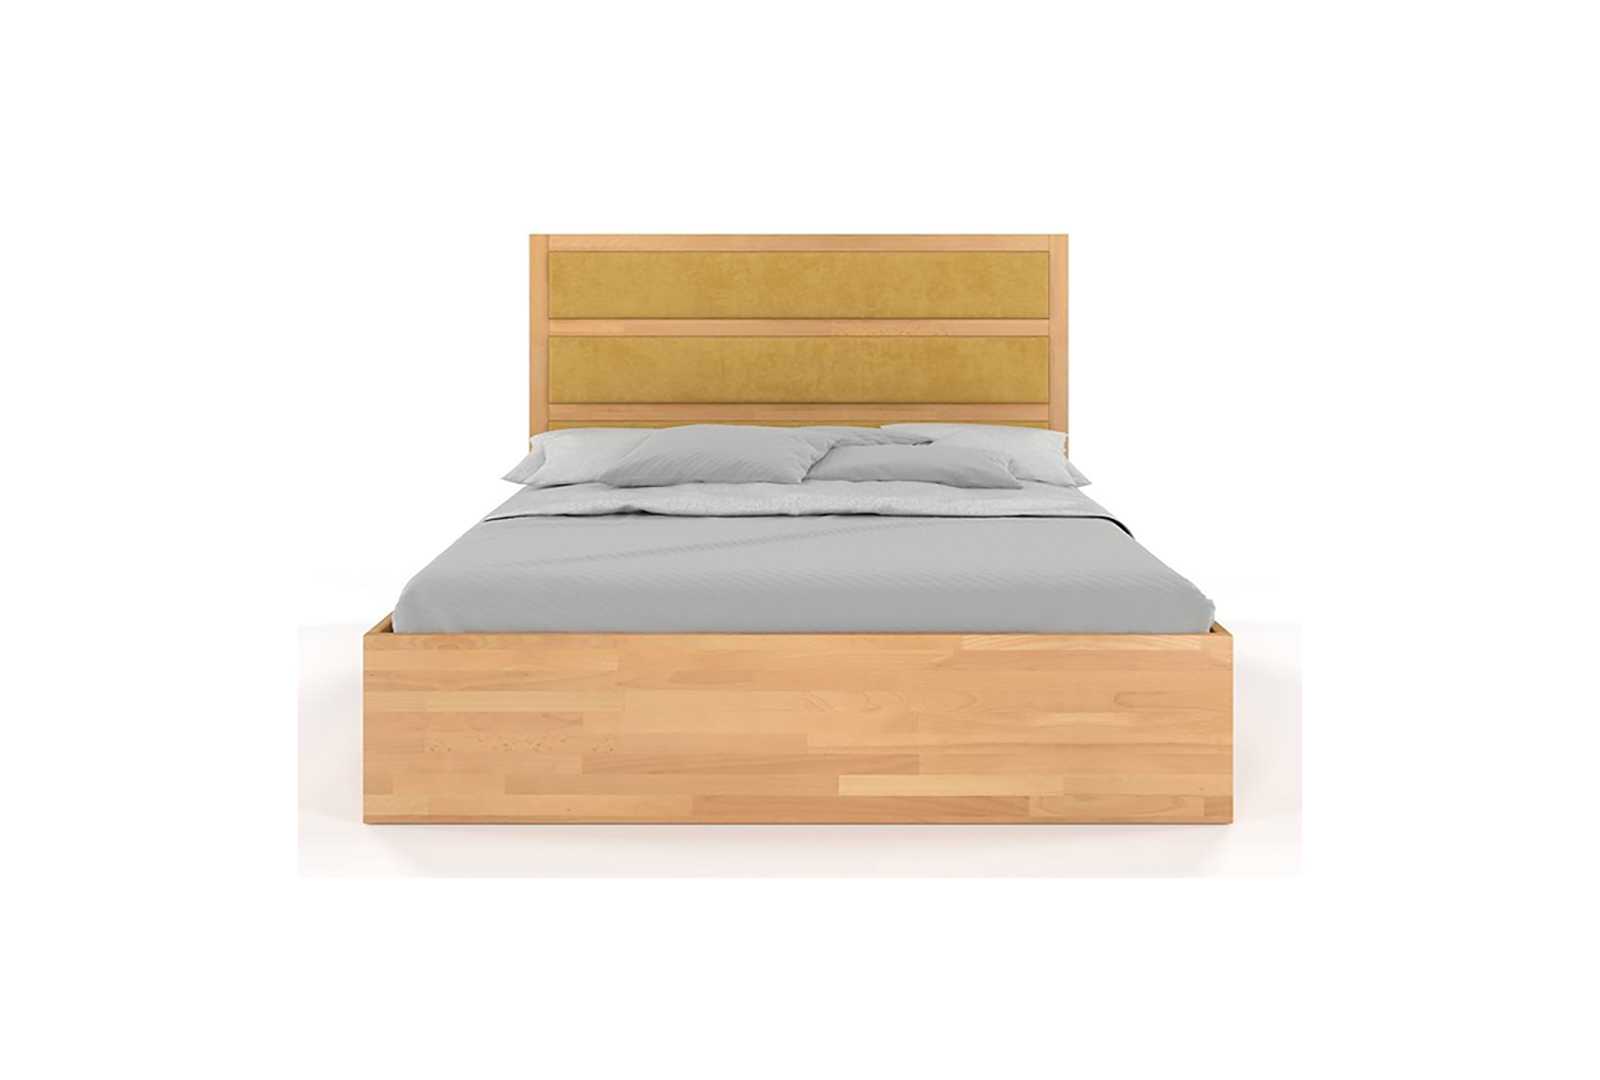 VISBY MAGNUS WOODEN BED WITH DRAWERS